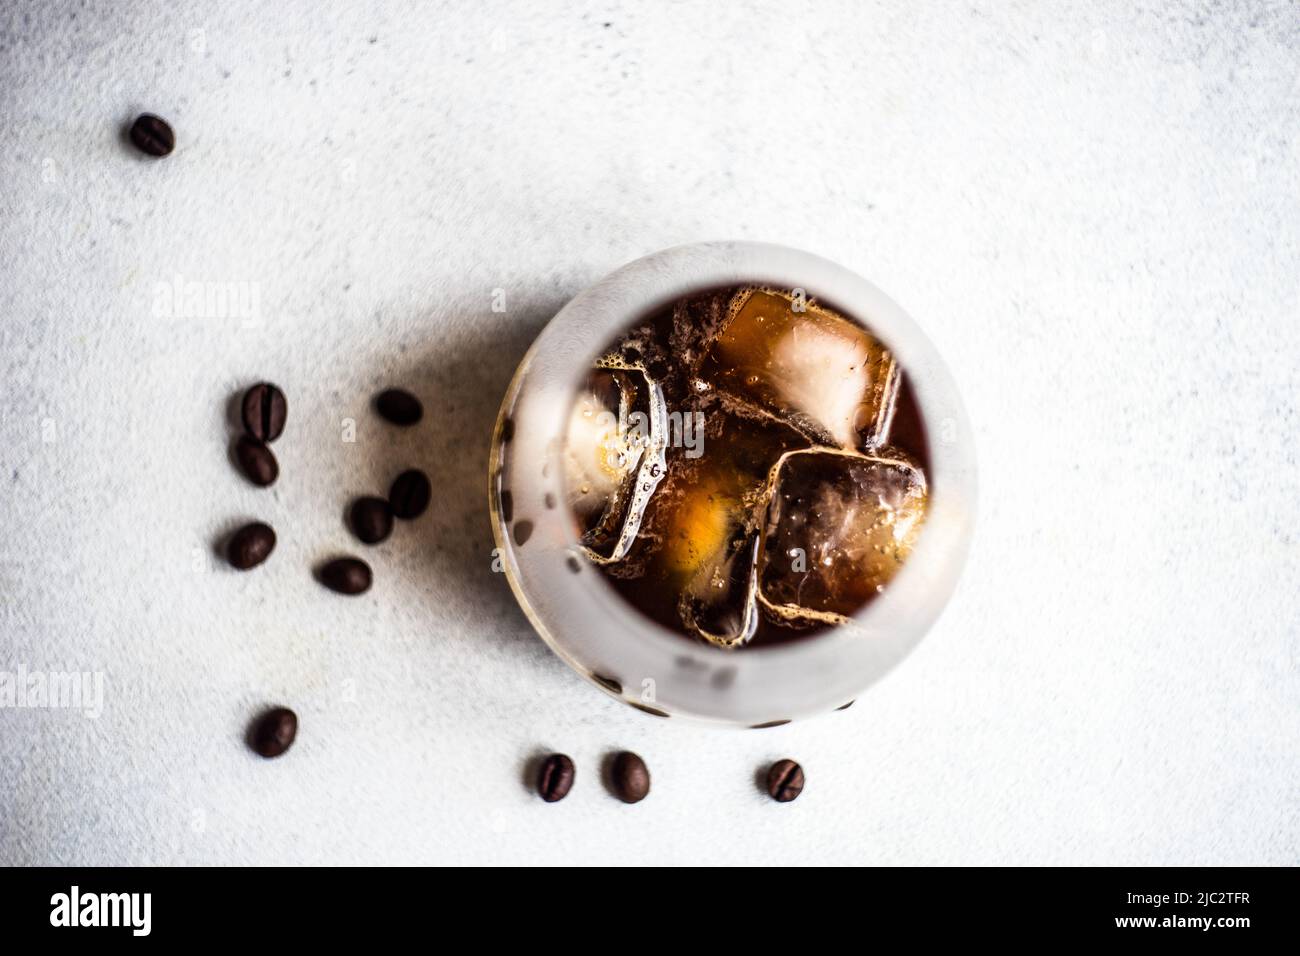 Overhead view of an iced coffee drink on a table with roasted coffee beans Stock Photo